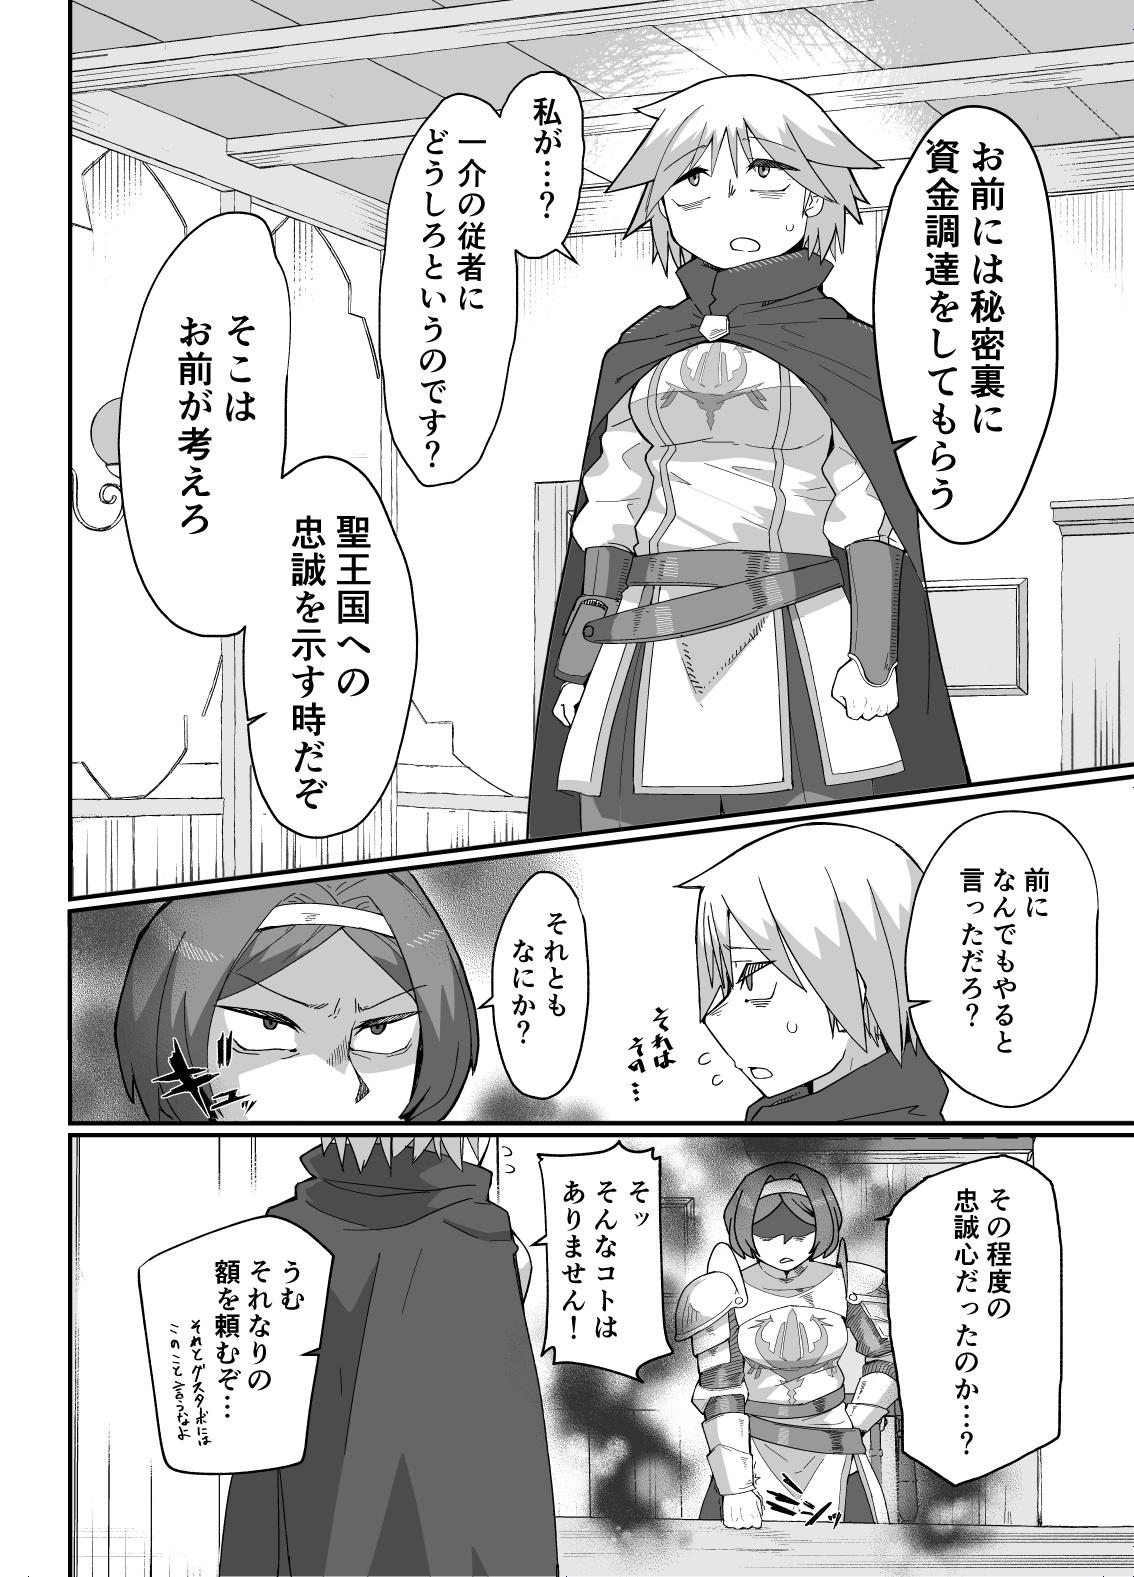 Hugetits Neia-chan's Doujinshi - Overlord Argenta - Page 2